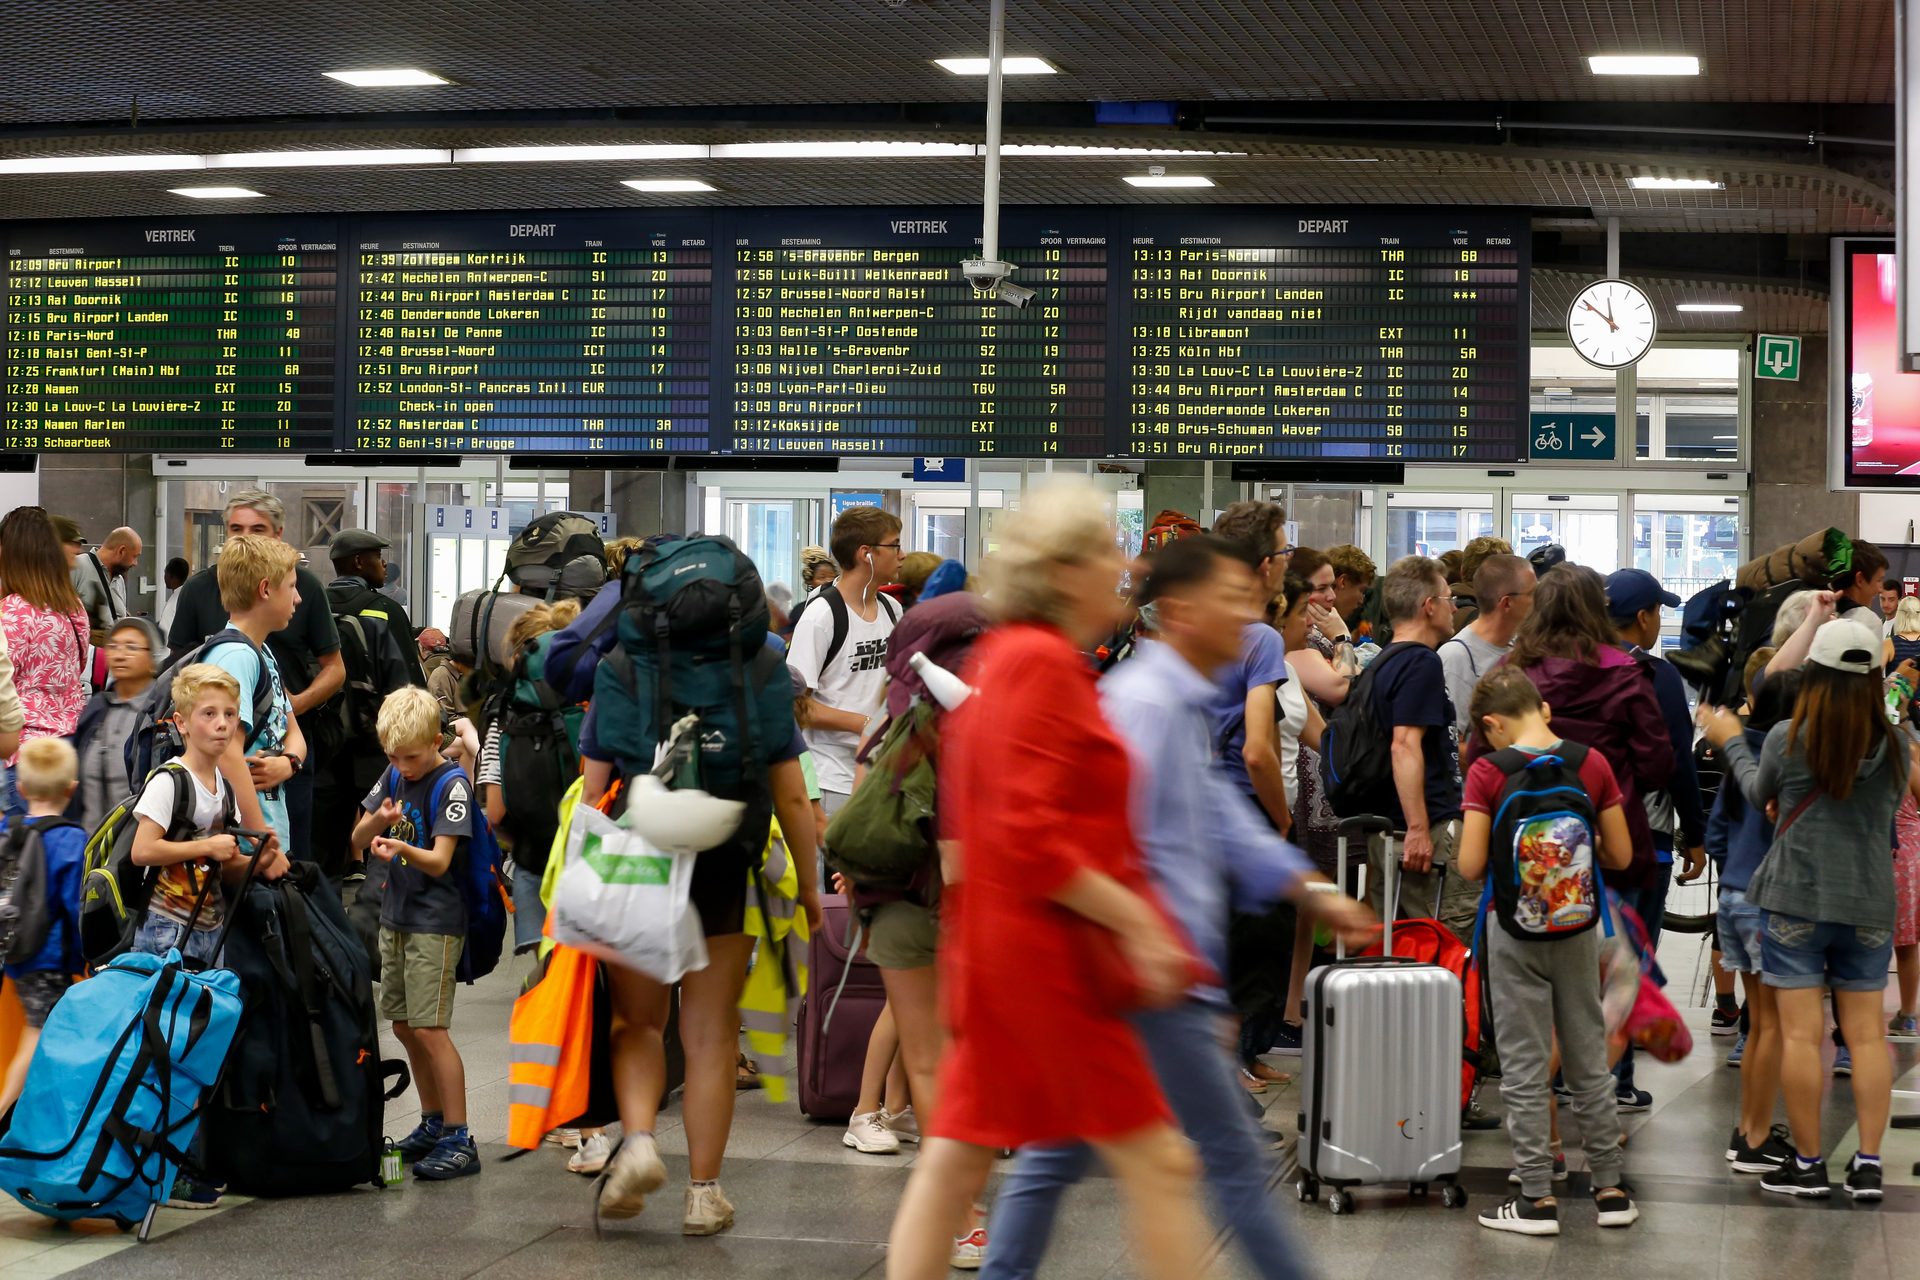 Armed robberies and drug dealers: Gare du Midi criticised for high levels of crime